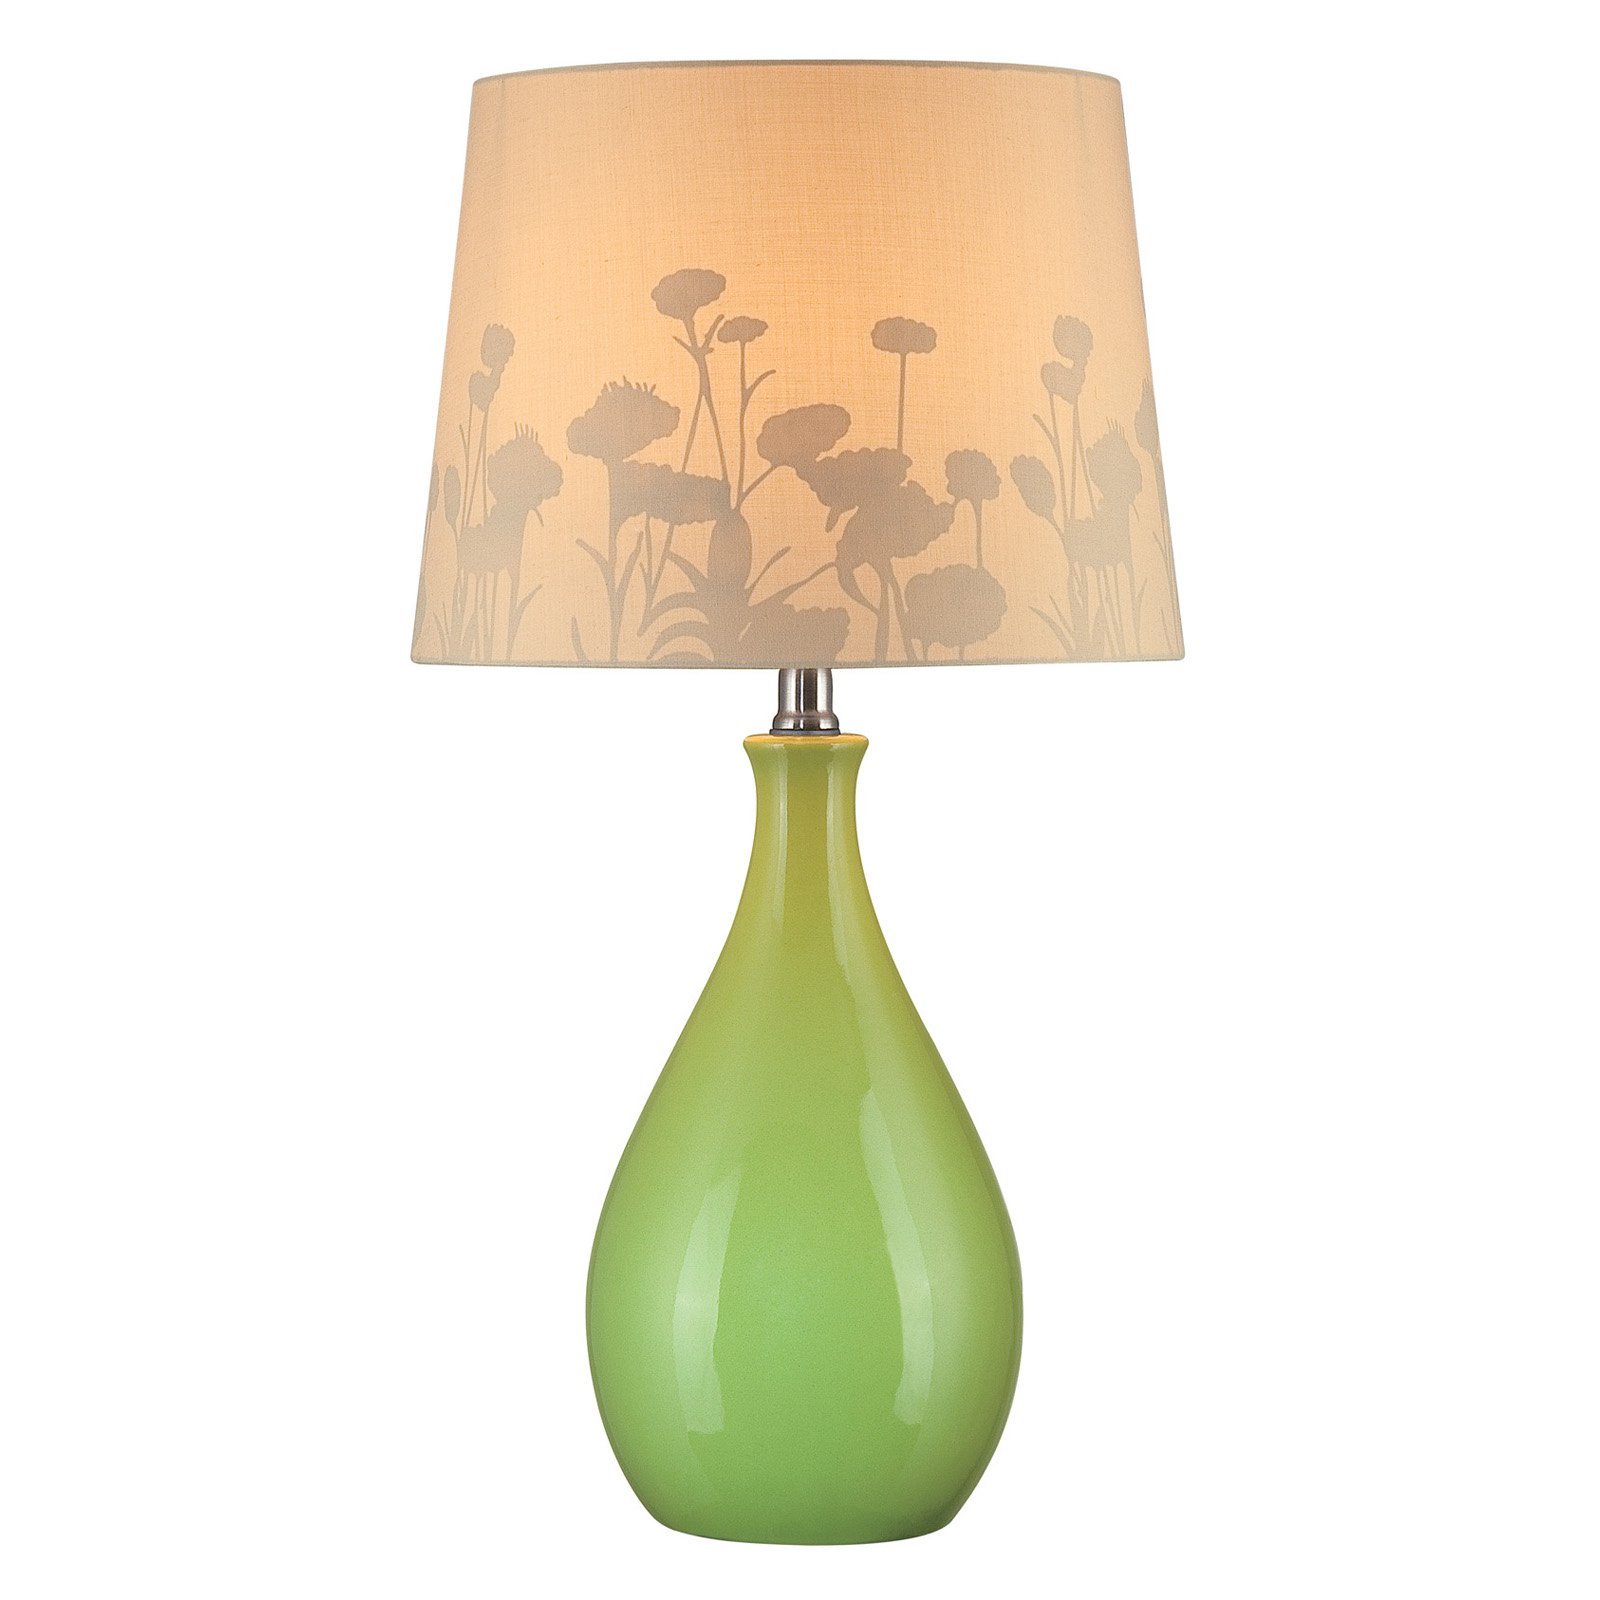 Lite Source Ls-21489 1 Light Up / Down Lighting Table Lamp - image 1 of 2